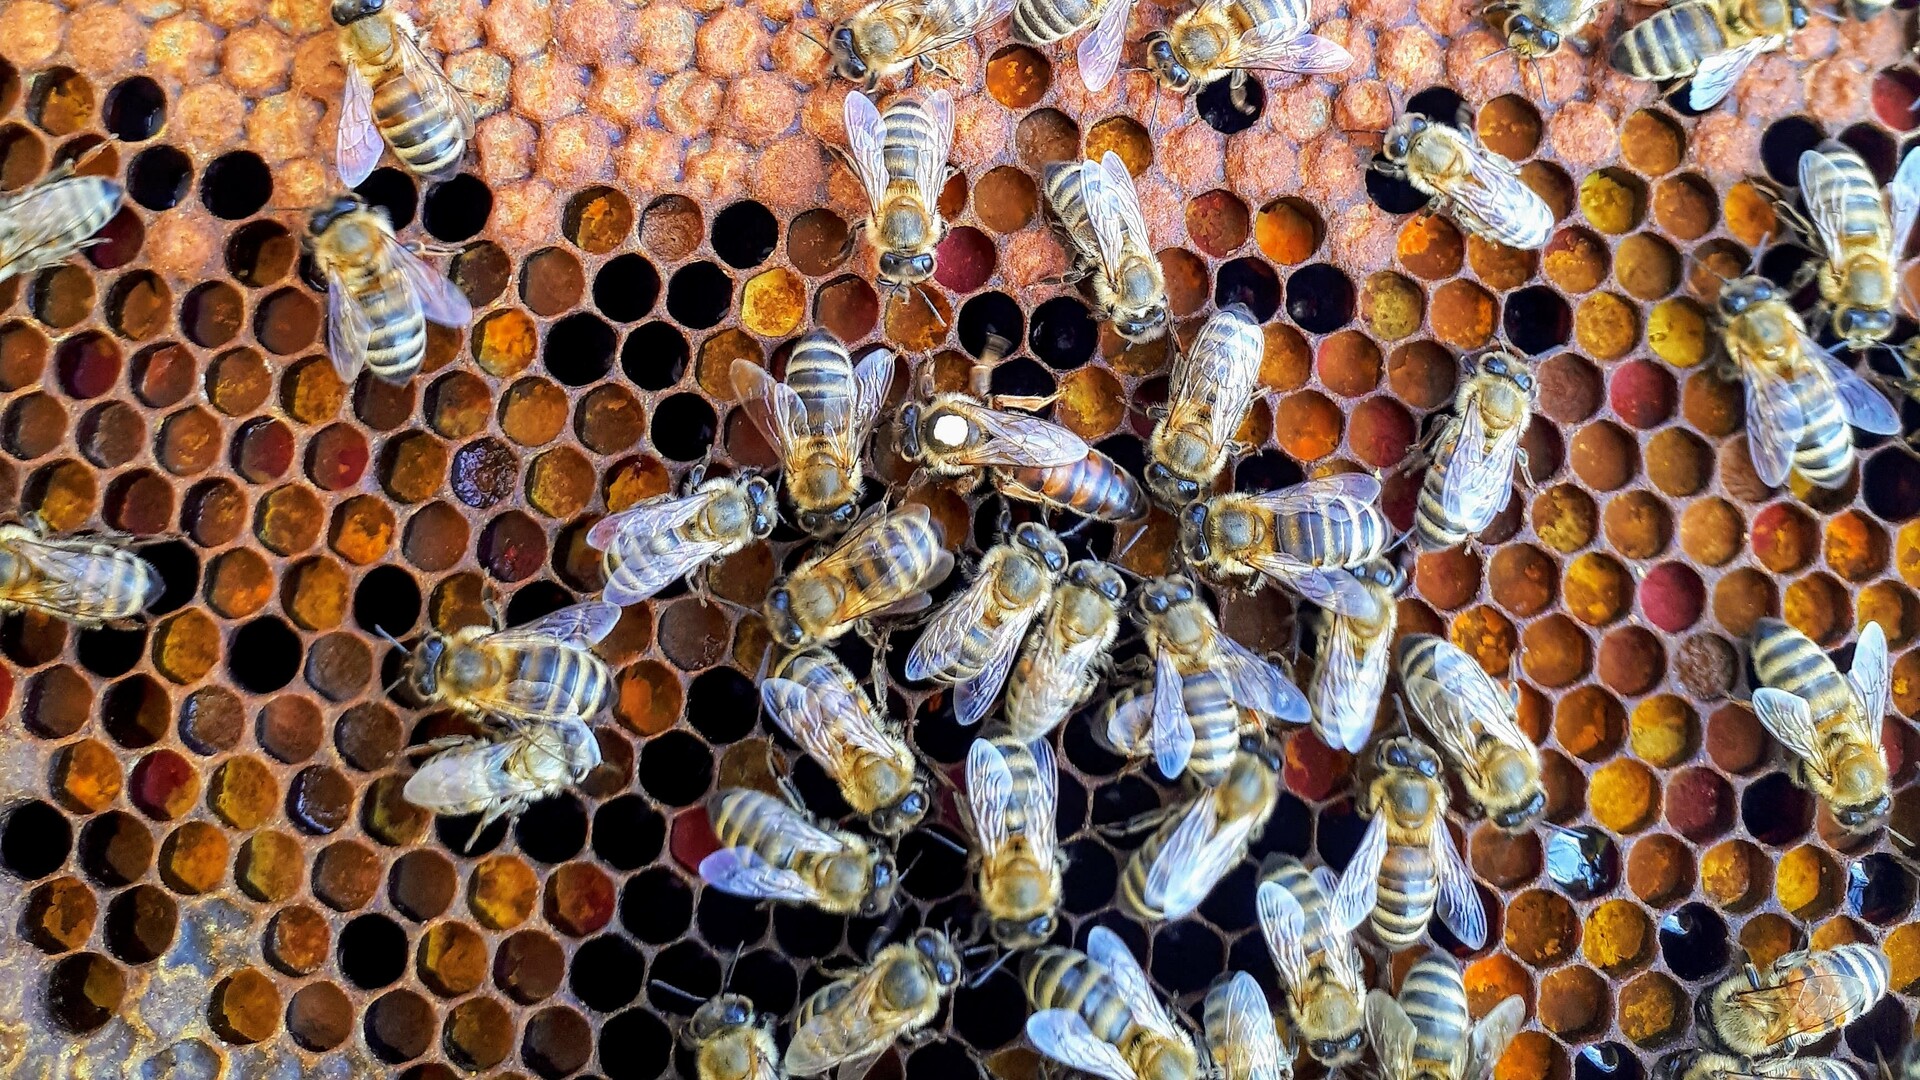 Using Artificial Intelligence to Protect Bees